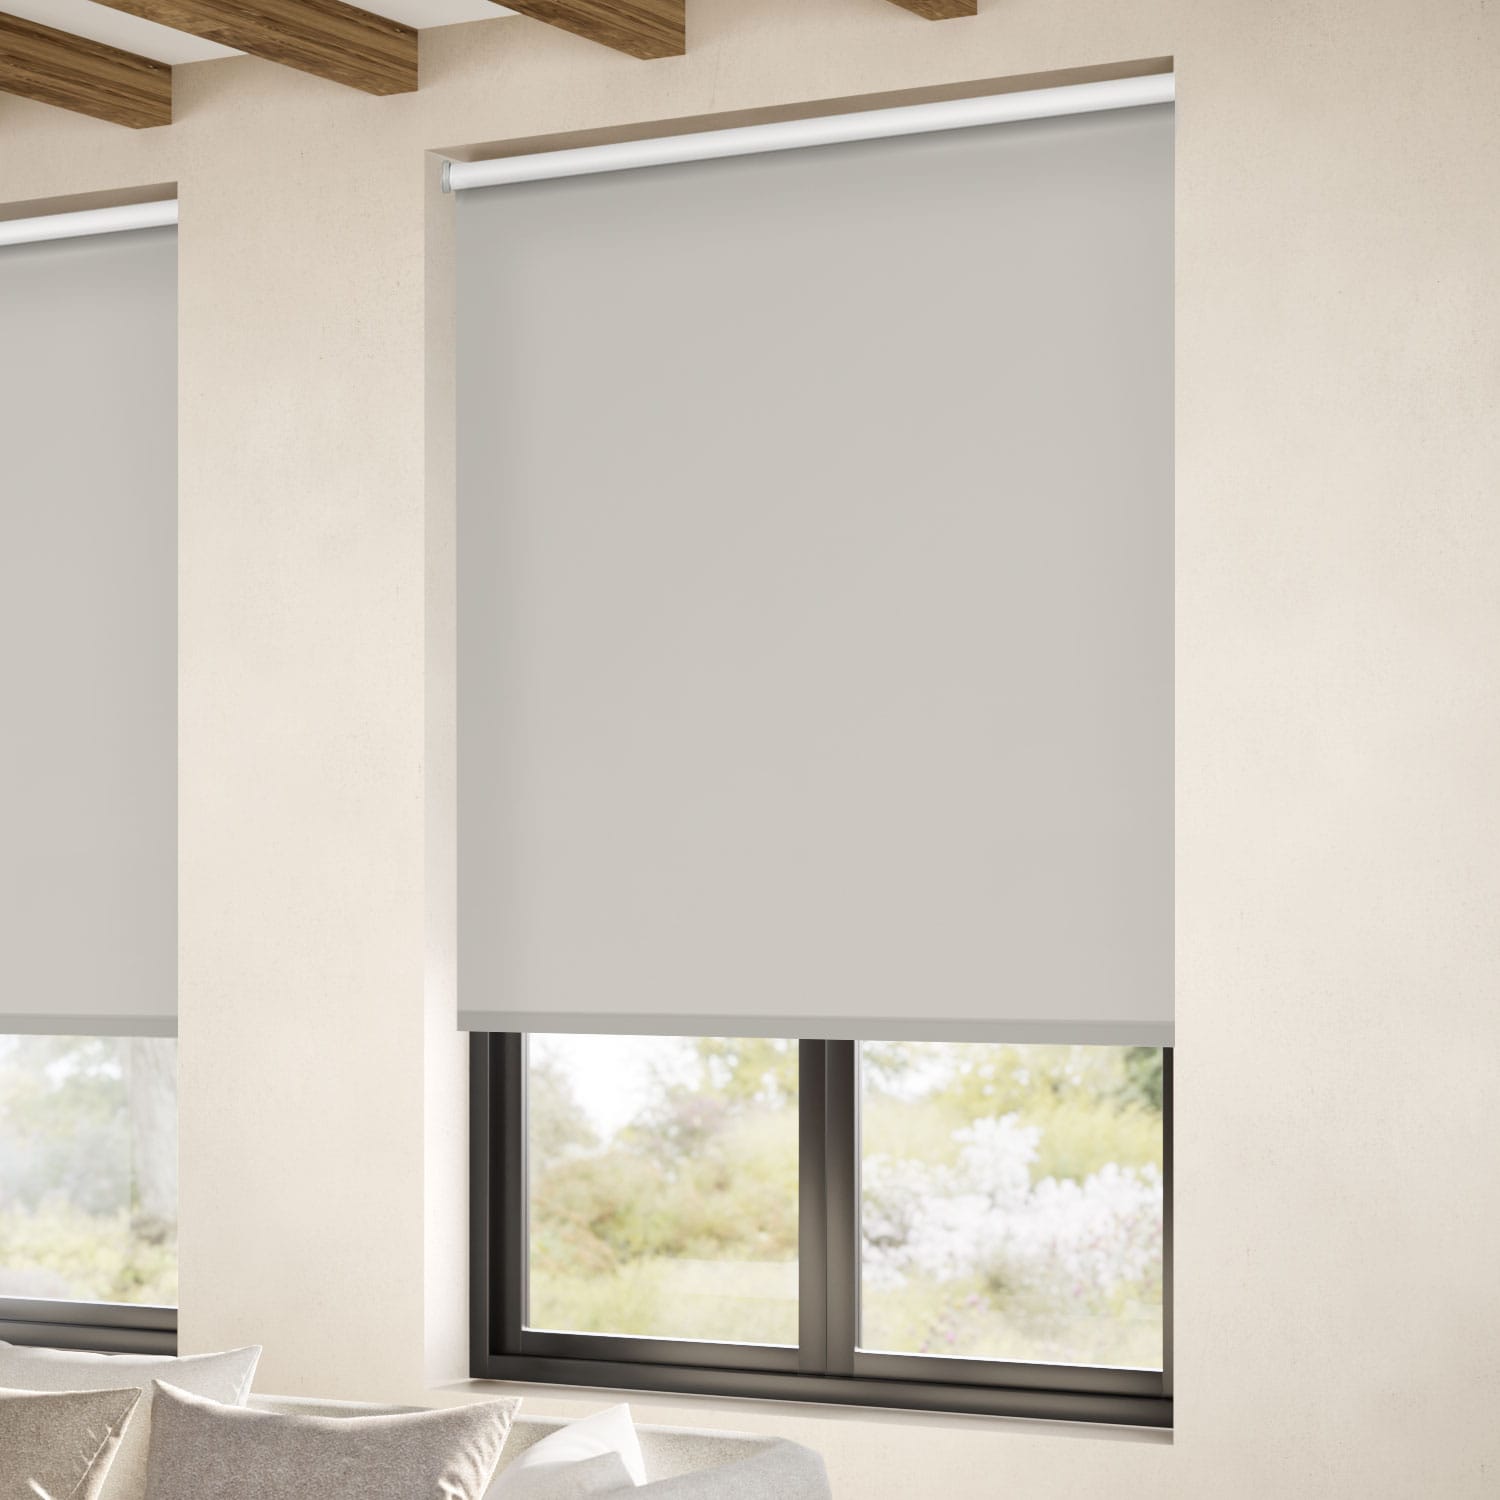 35.43 165cm Drop Trimmable Thermal Blackout Roller Blinds Grey, 90cm